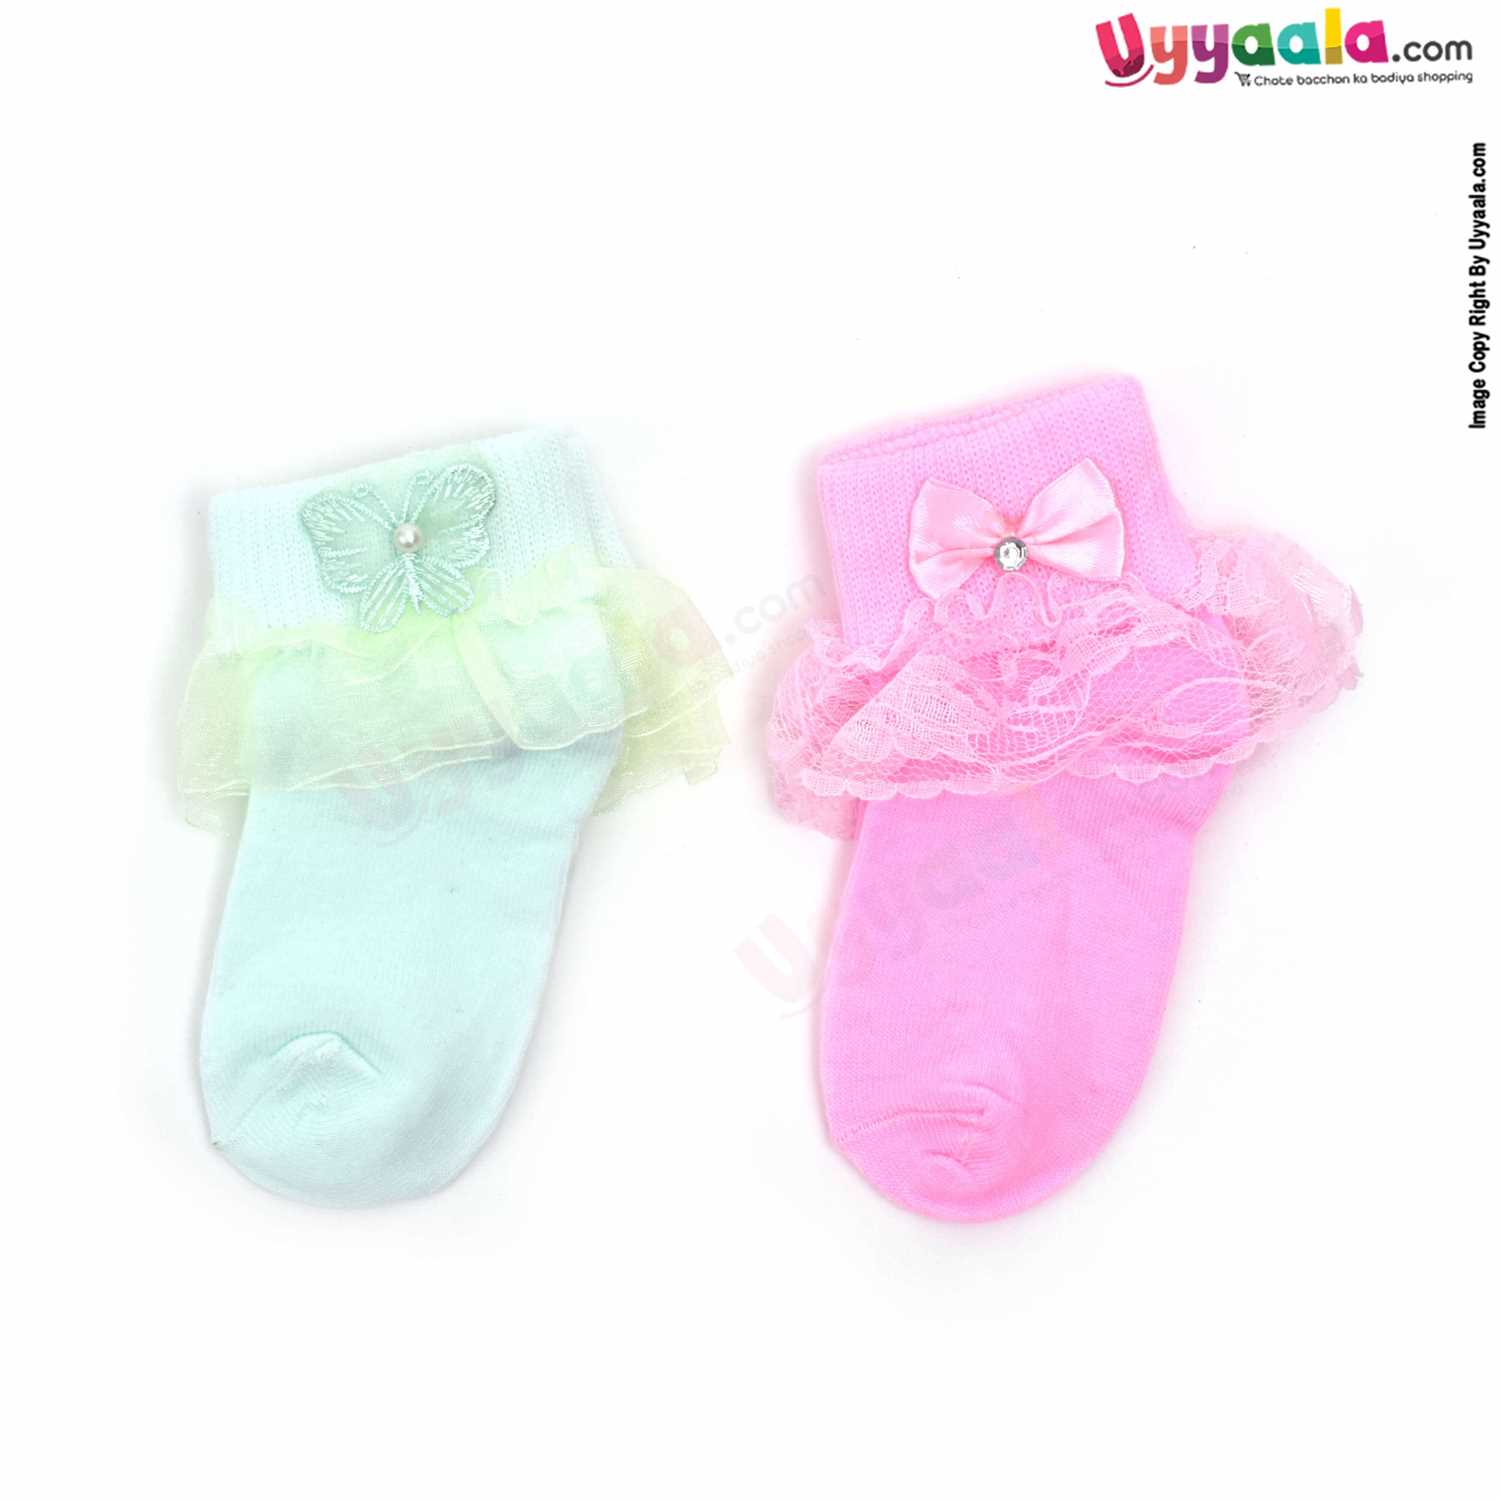 Hosiery Cotton Socks for Baby Girl Pack of 2, 6-18m Age - Pink & Light Green